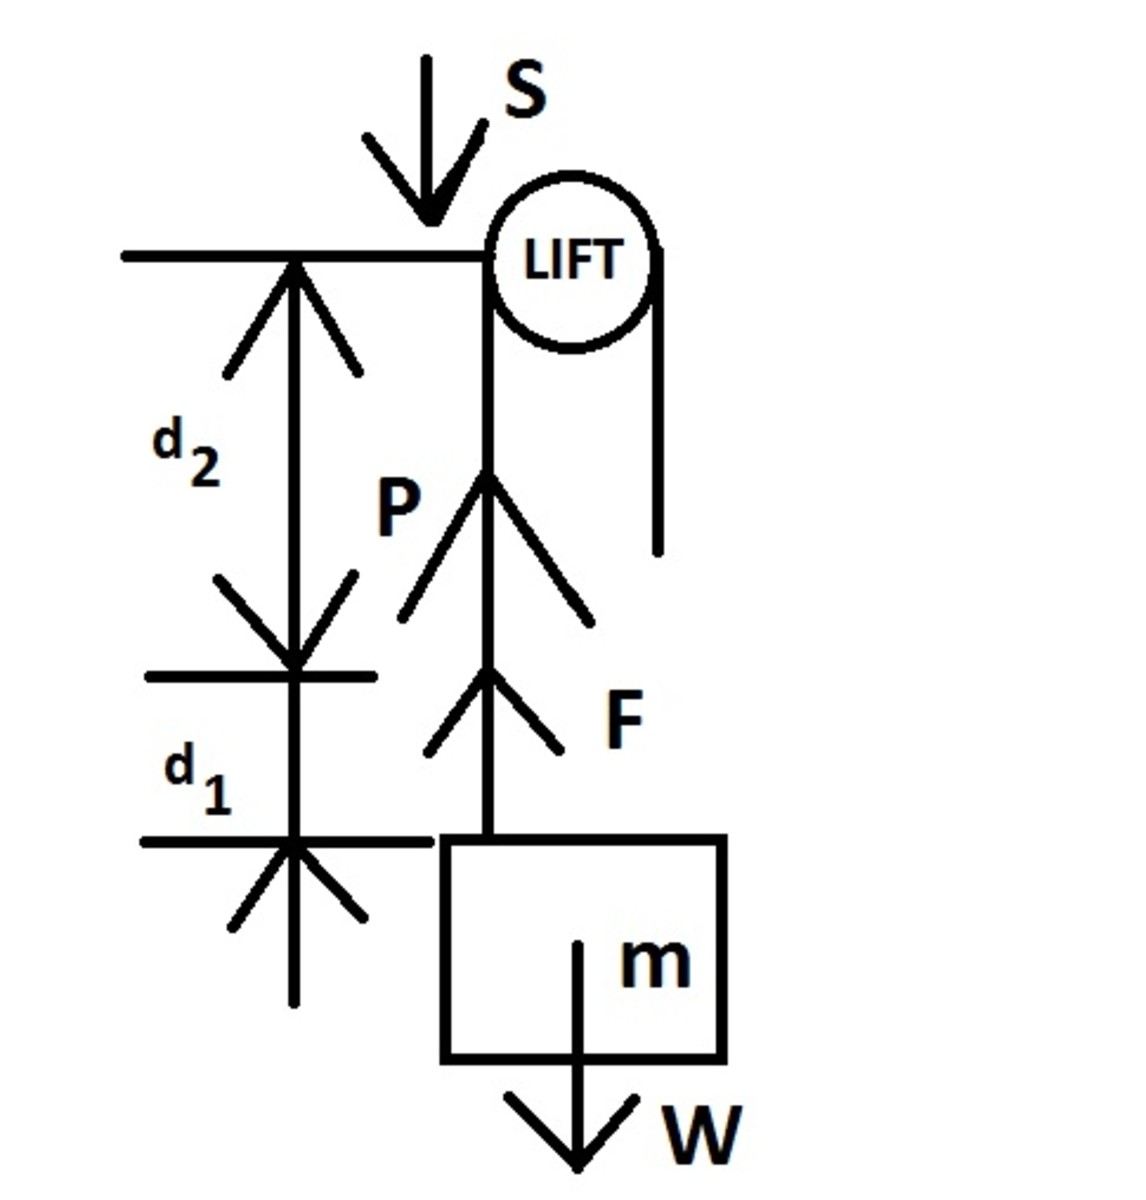 example-of-calculation-of-power-and-work-done-by-a-lift